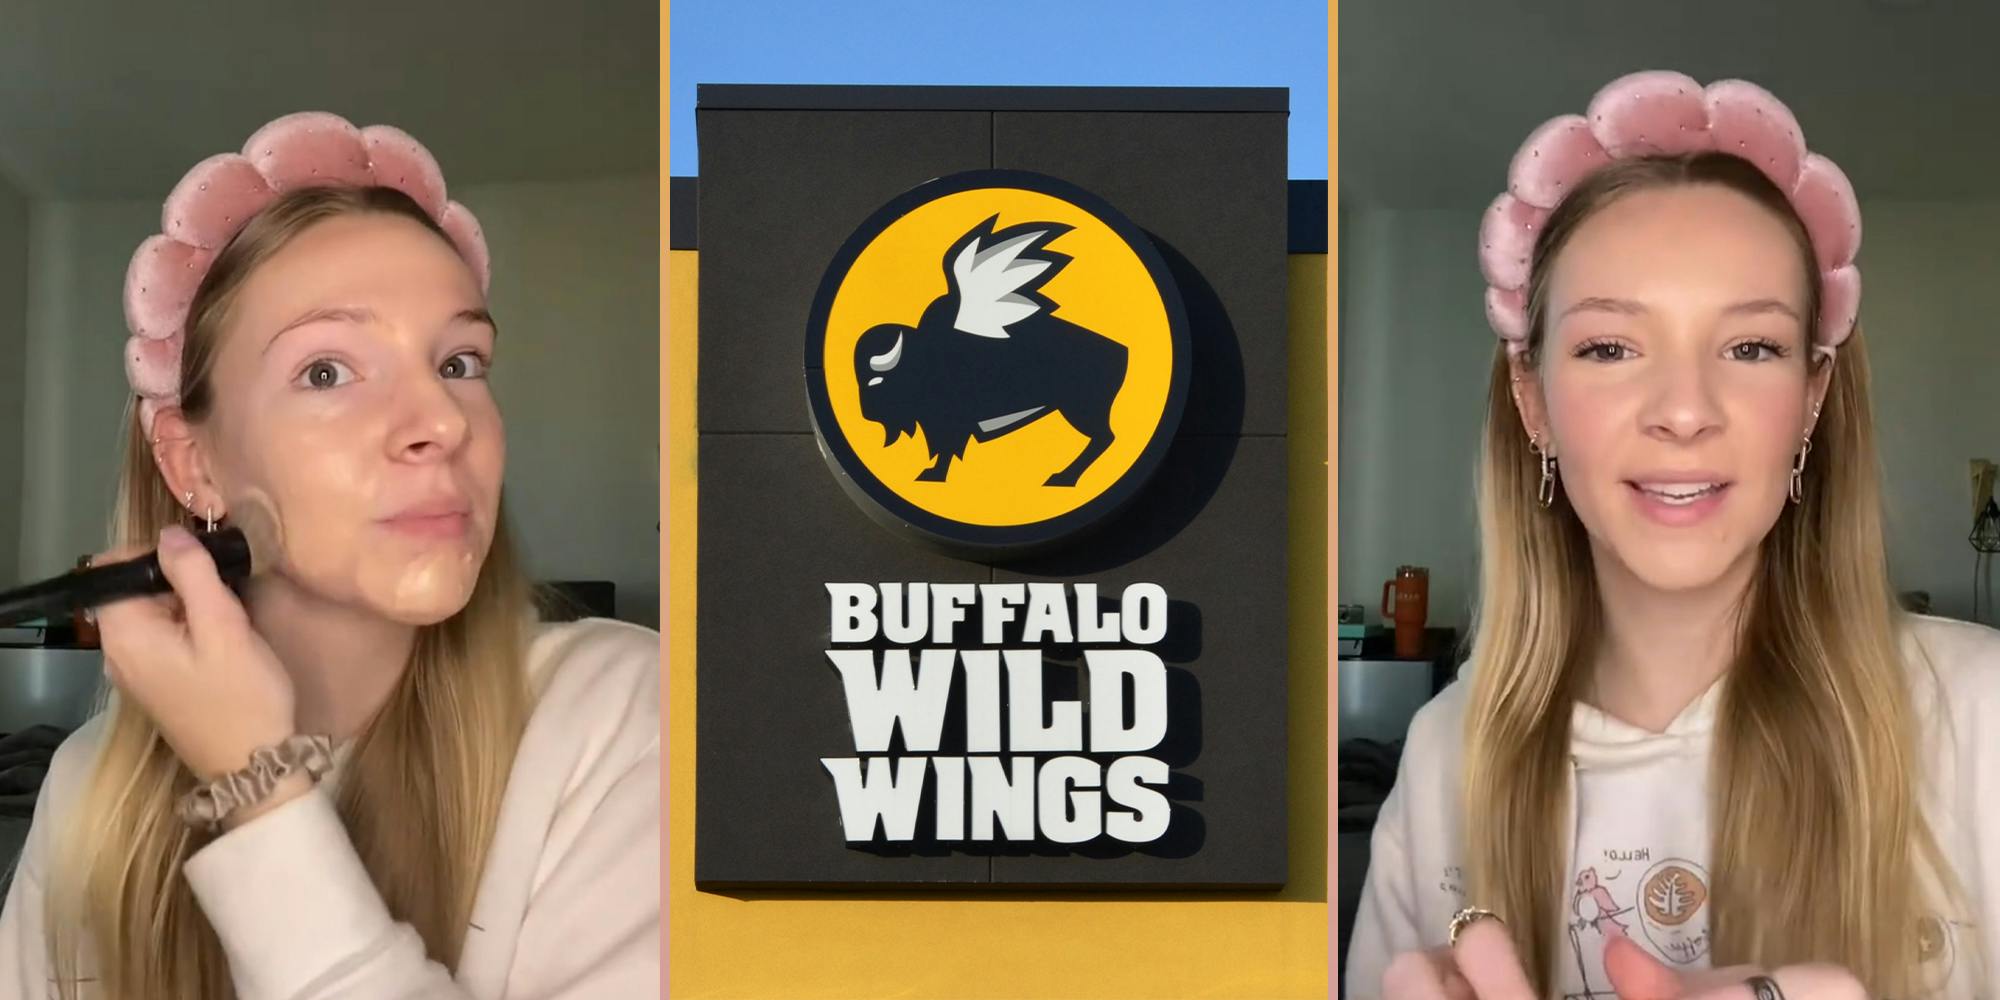 Ex-server explains why she won’t tip at Buffalo Wild Wings after she caught waitress being bad